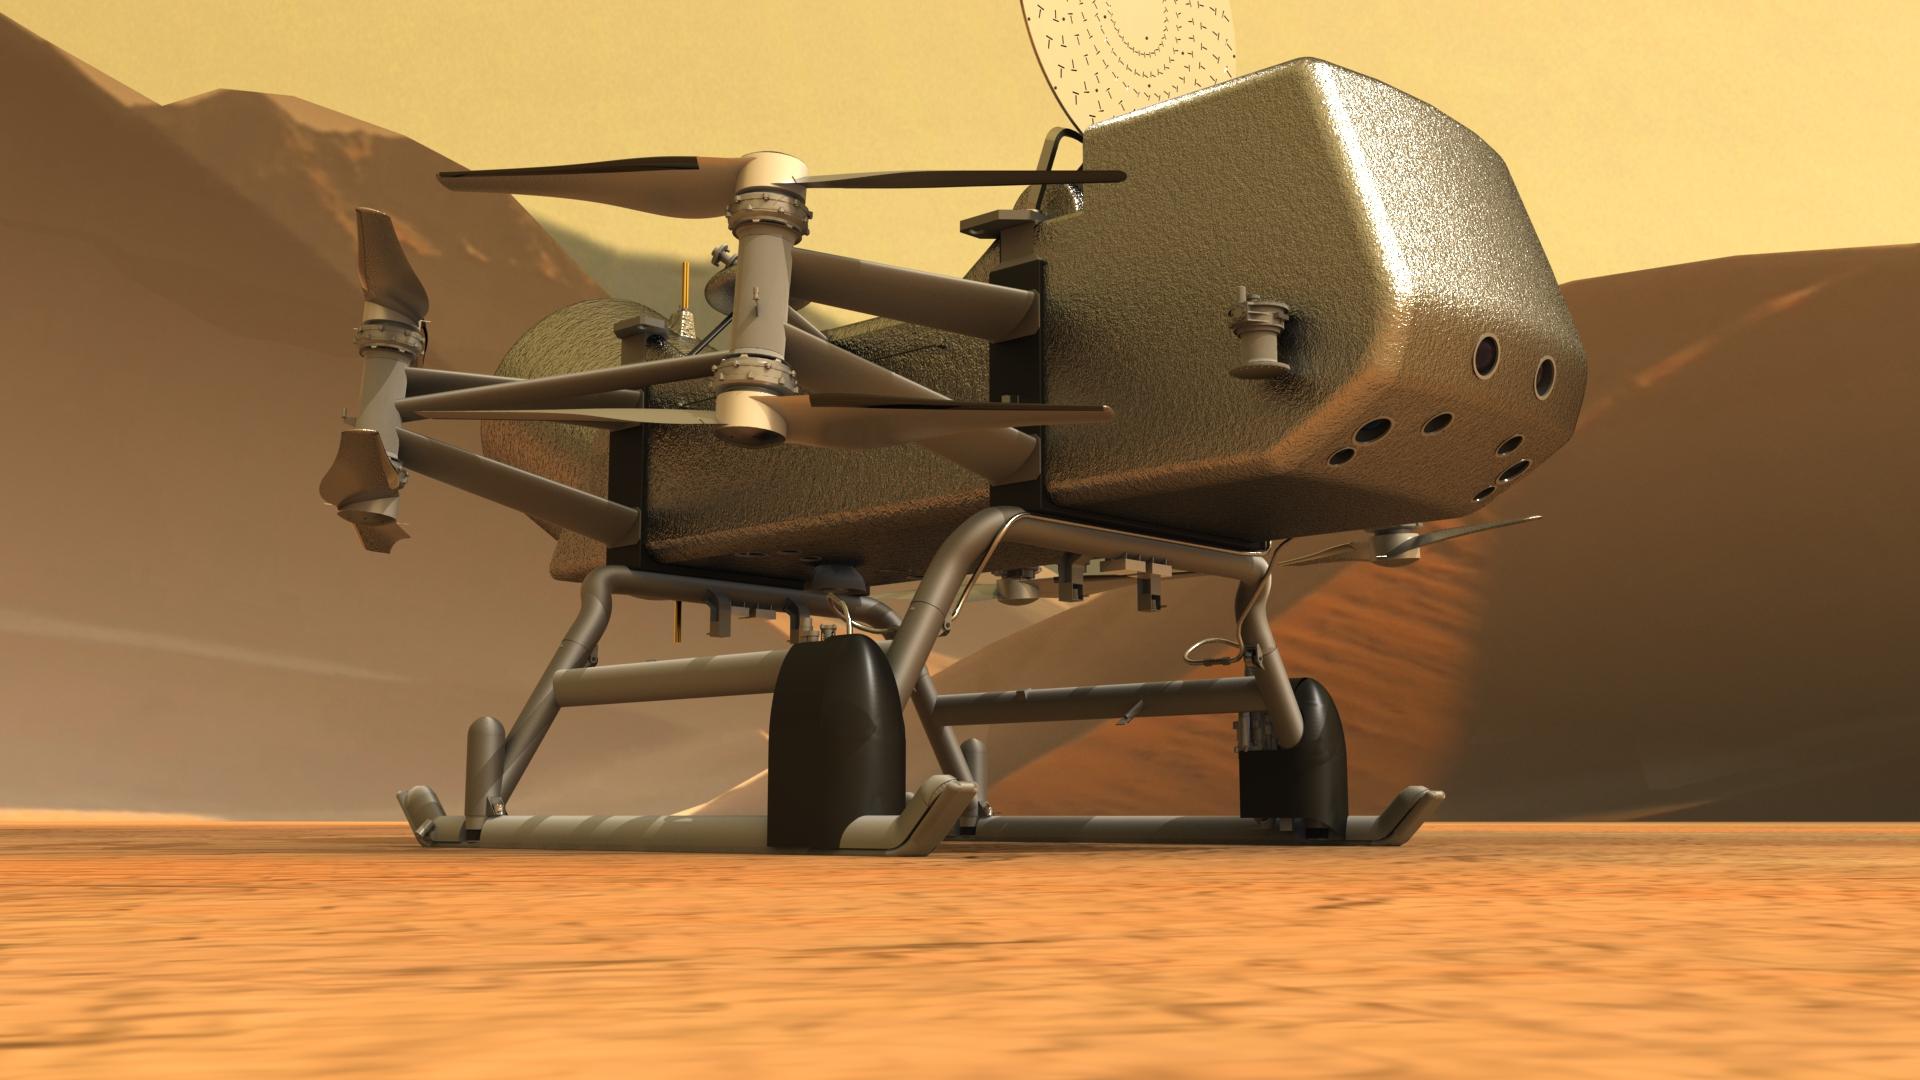 Close up artist’s impression of Dragonfly on the surface of Titan